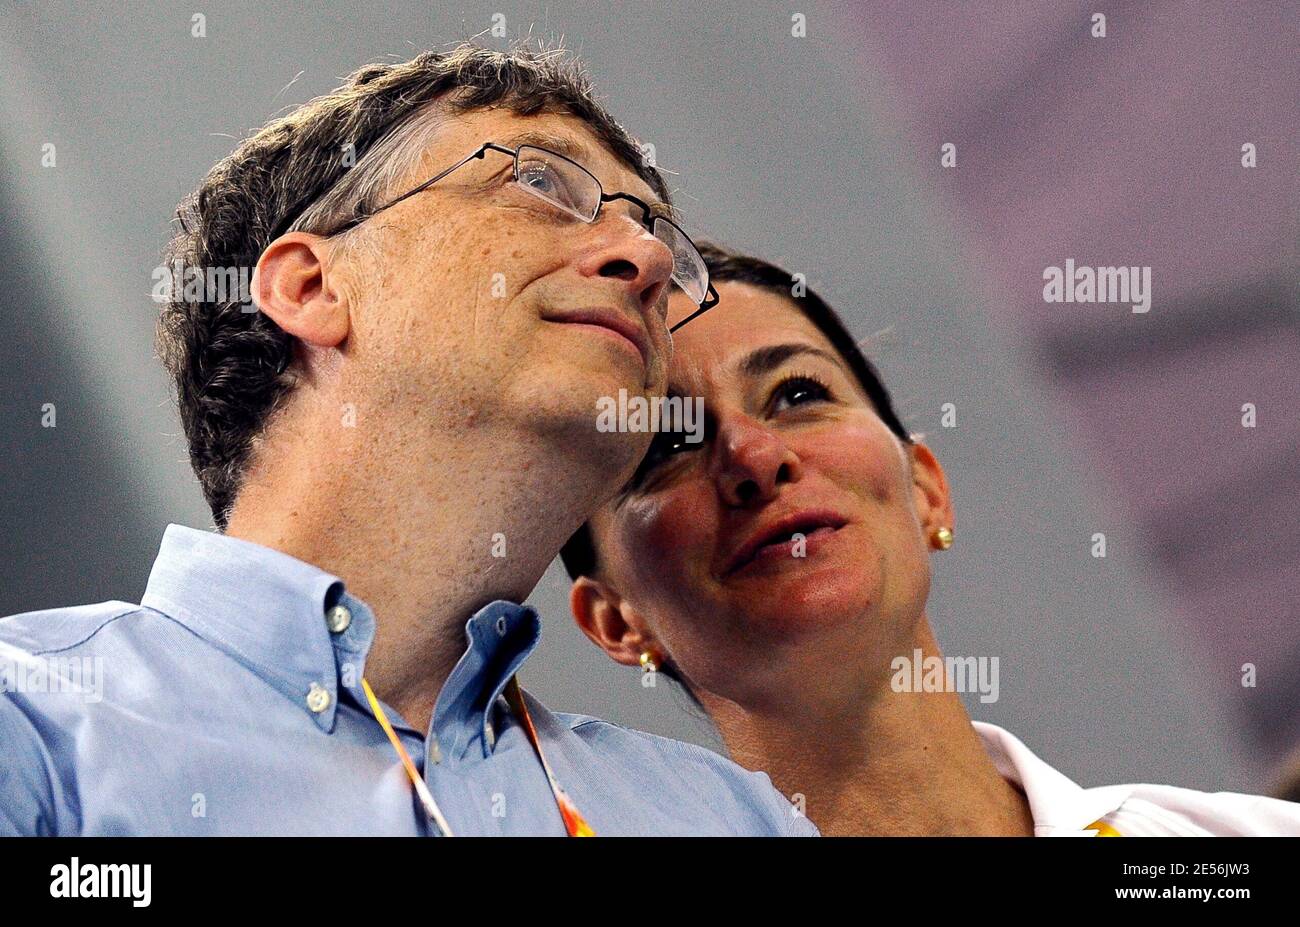 Bill Gates and his wife Melinda attend the Swimming Finals during the XXIX Olympiad at the National Aquatics Center in Beijing, China on August 10, 2008. Photo by Jing Min/Cameleon/ABACAPRESS.COM Stock Photo